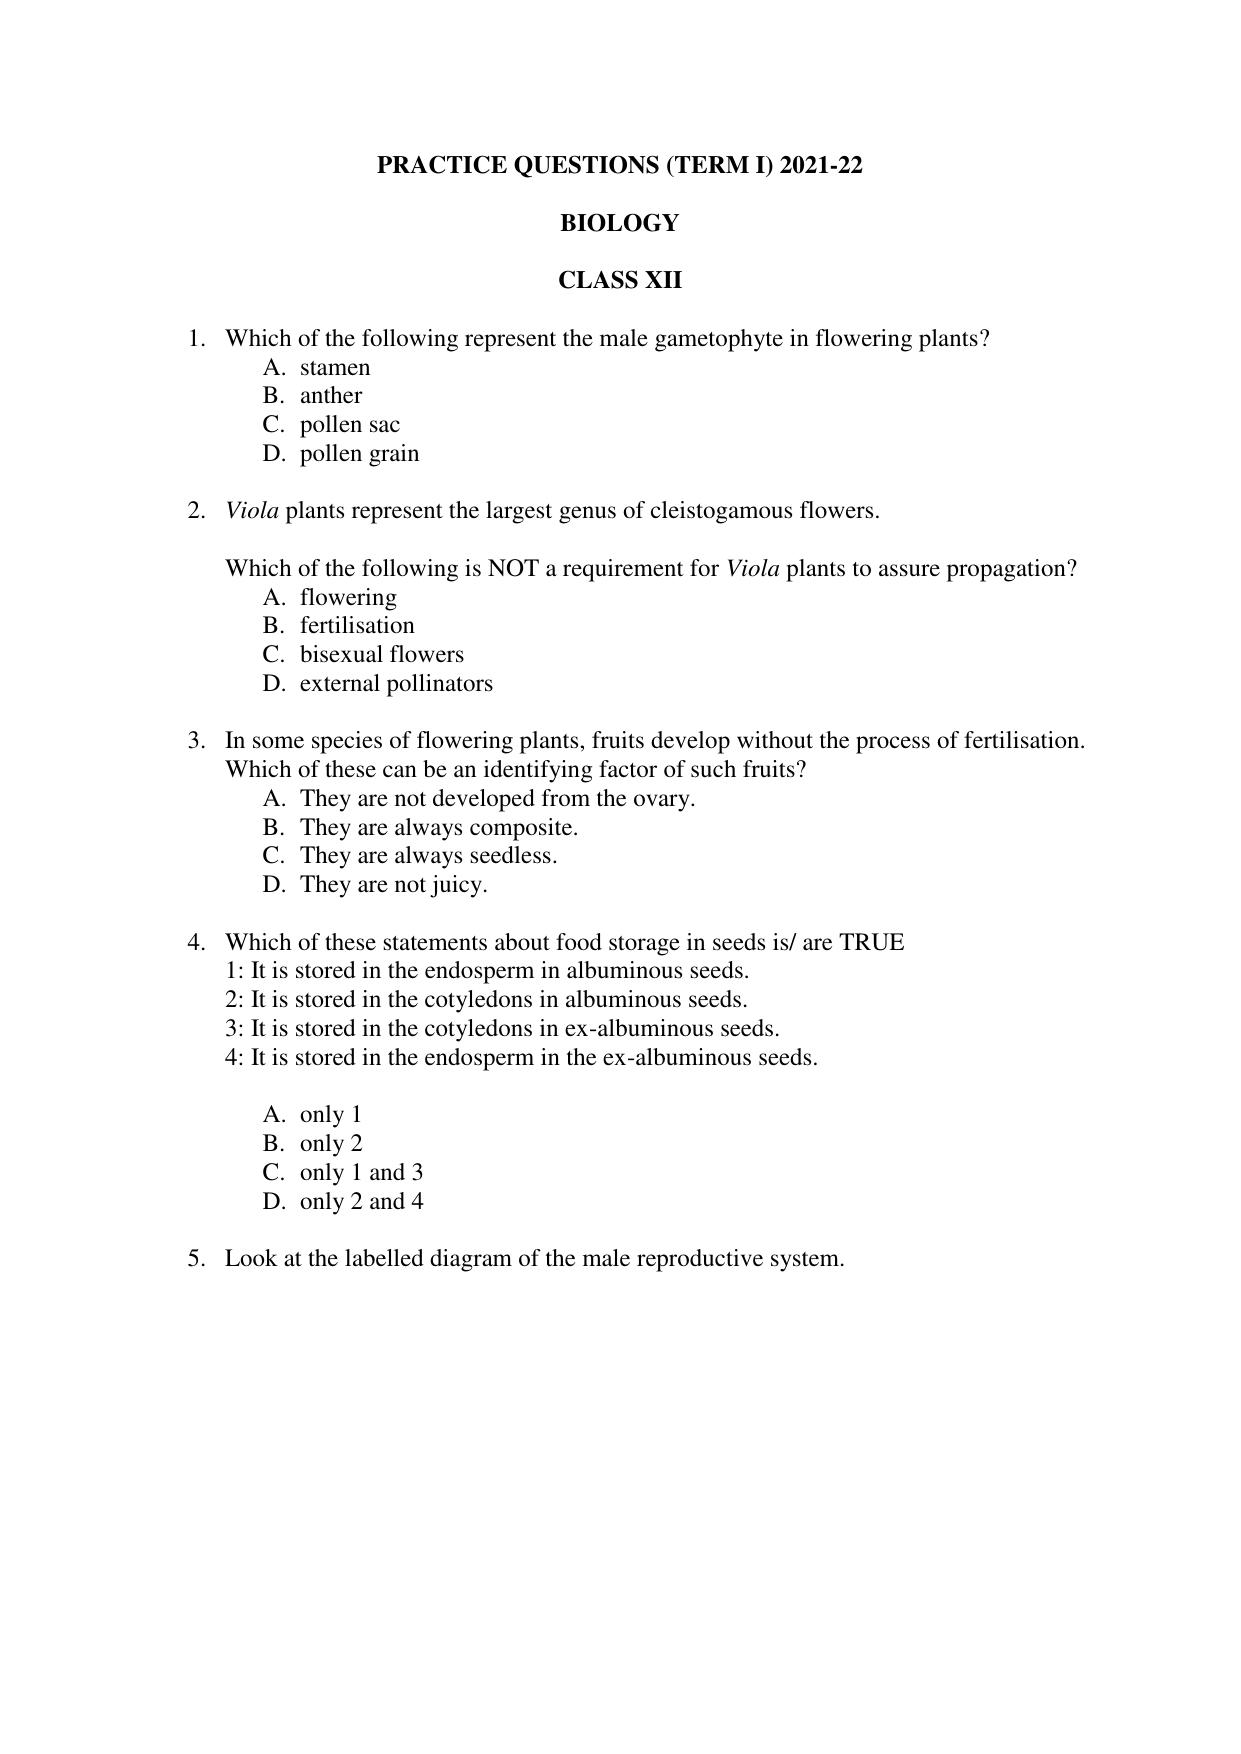 CBSE Class 12 Biology Term 1 Practice Questions 2021-22 - Page 1